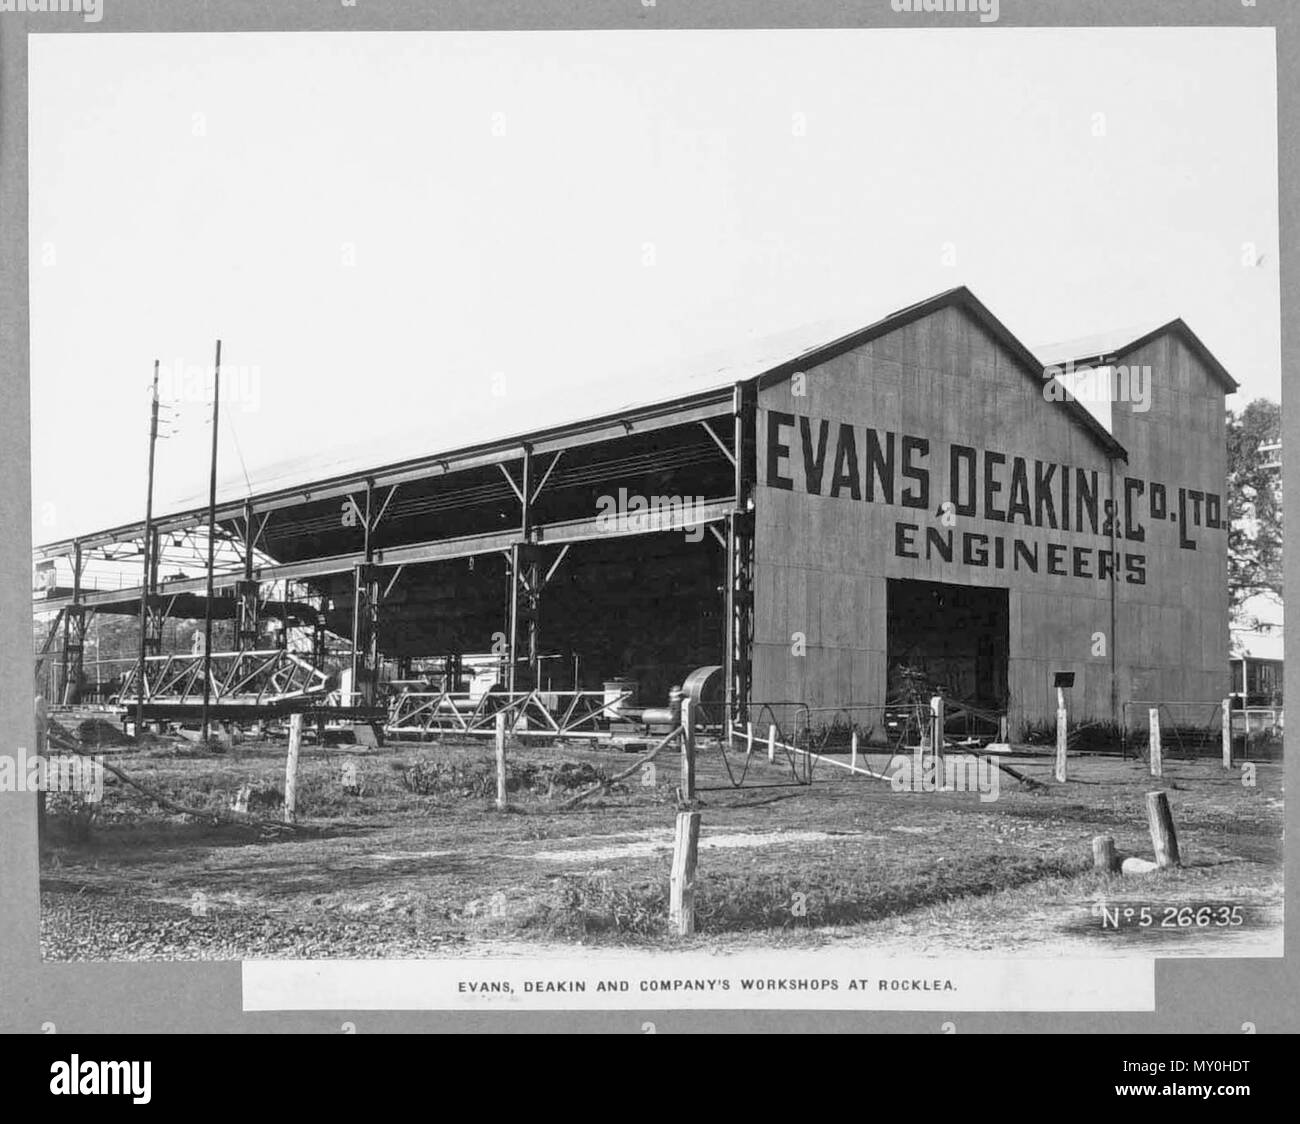 Evans Deakin and Company's Workshops at Rocklea, Brisbane, 26 June. Part of the workshops constructed to fabricate components of the Story Bridge. Stock Photo